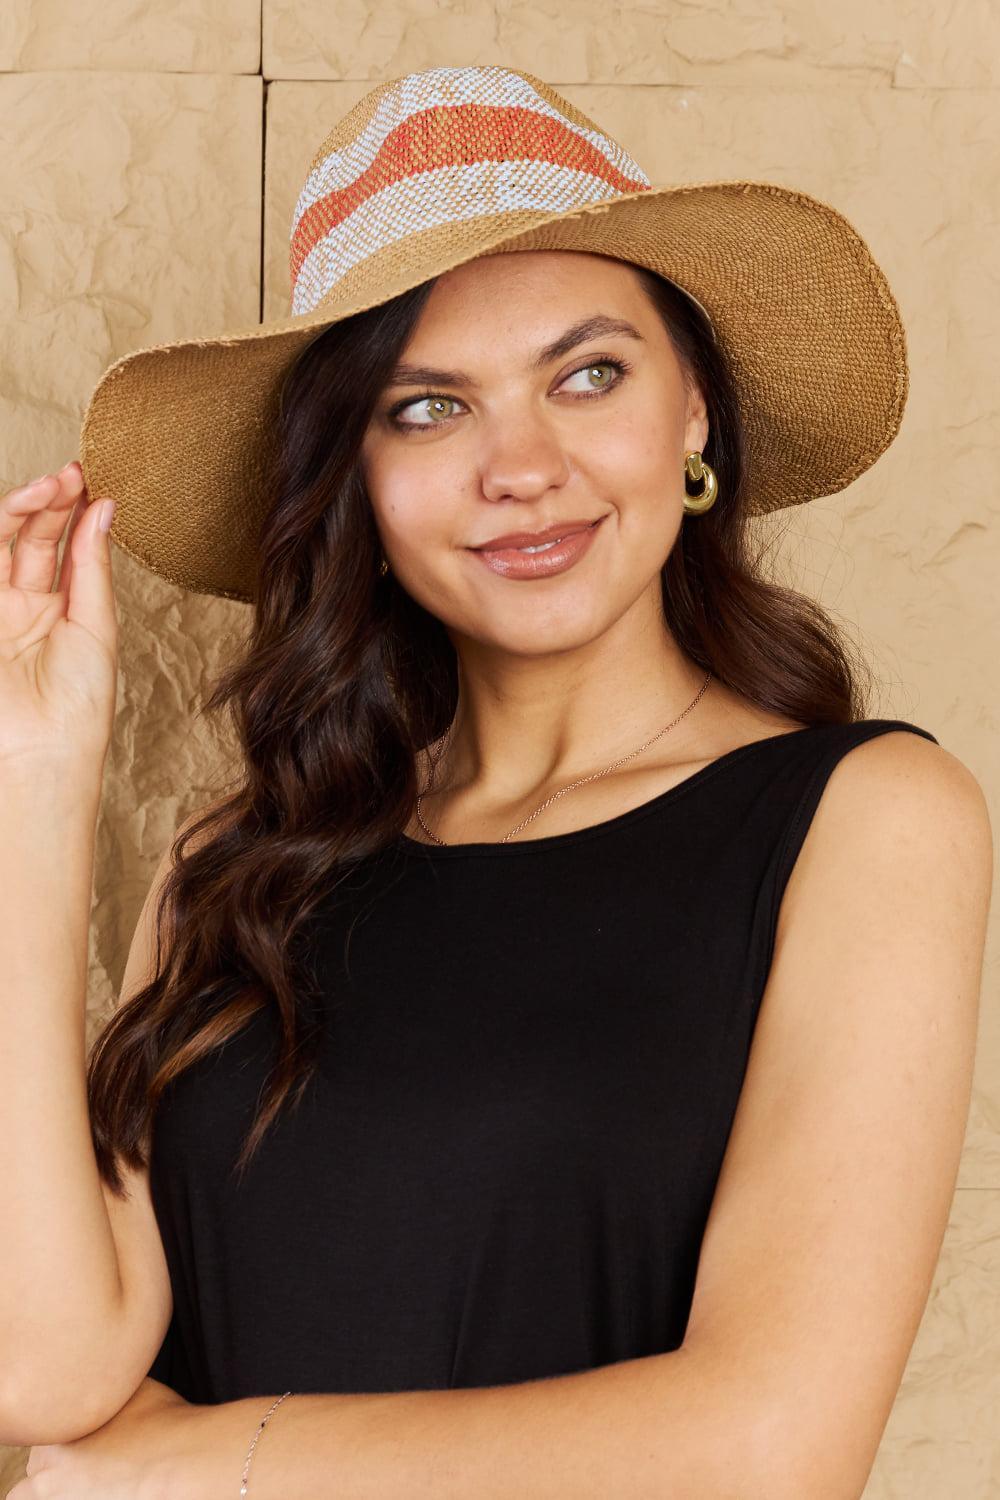 a woman wearing a brown hat and a black top